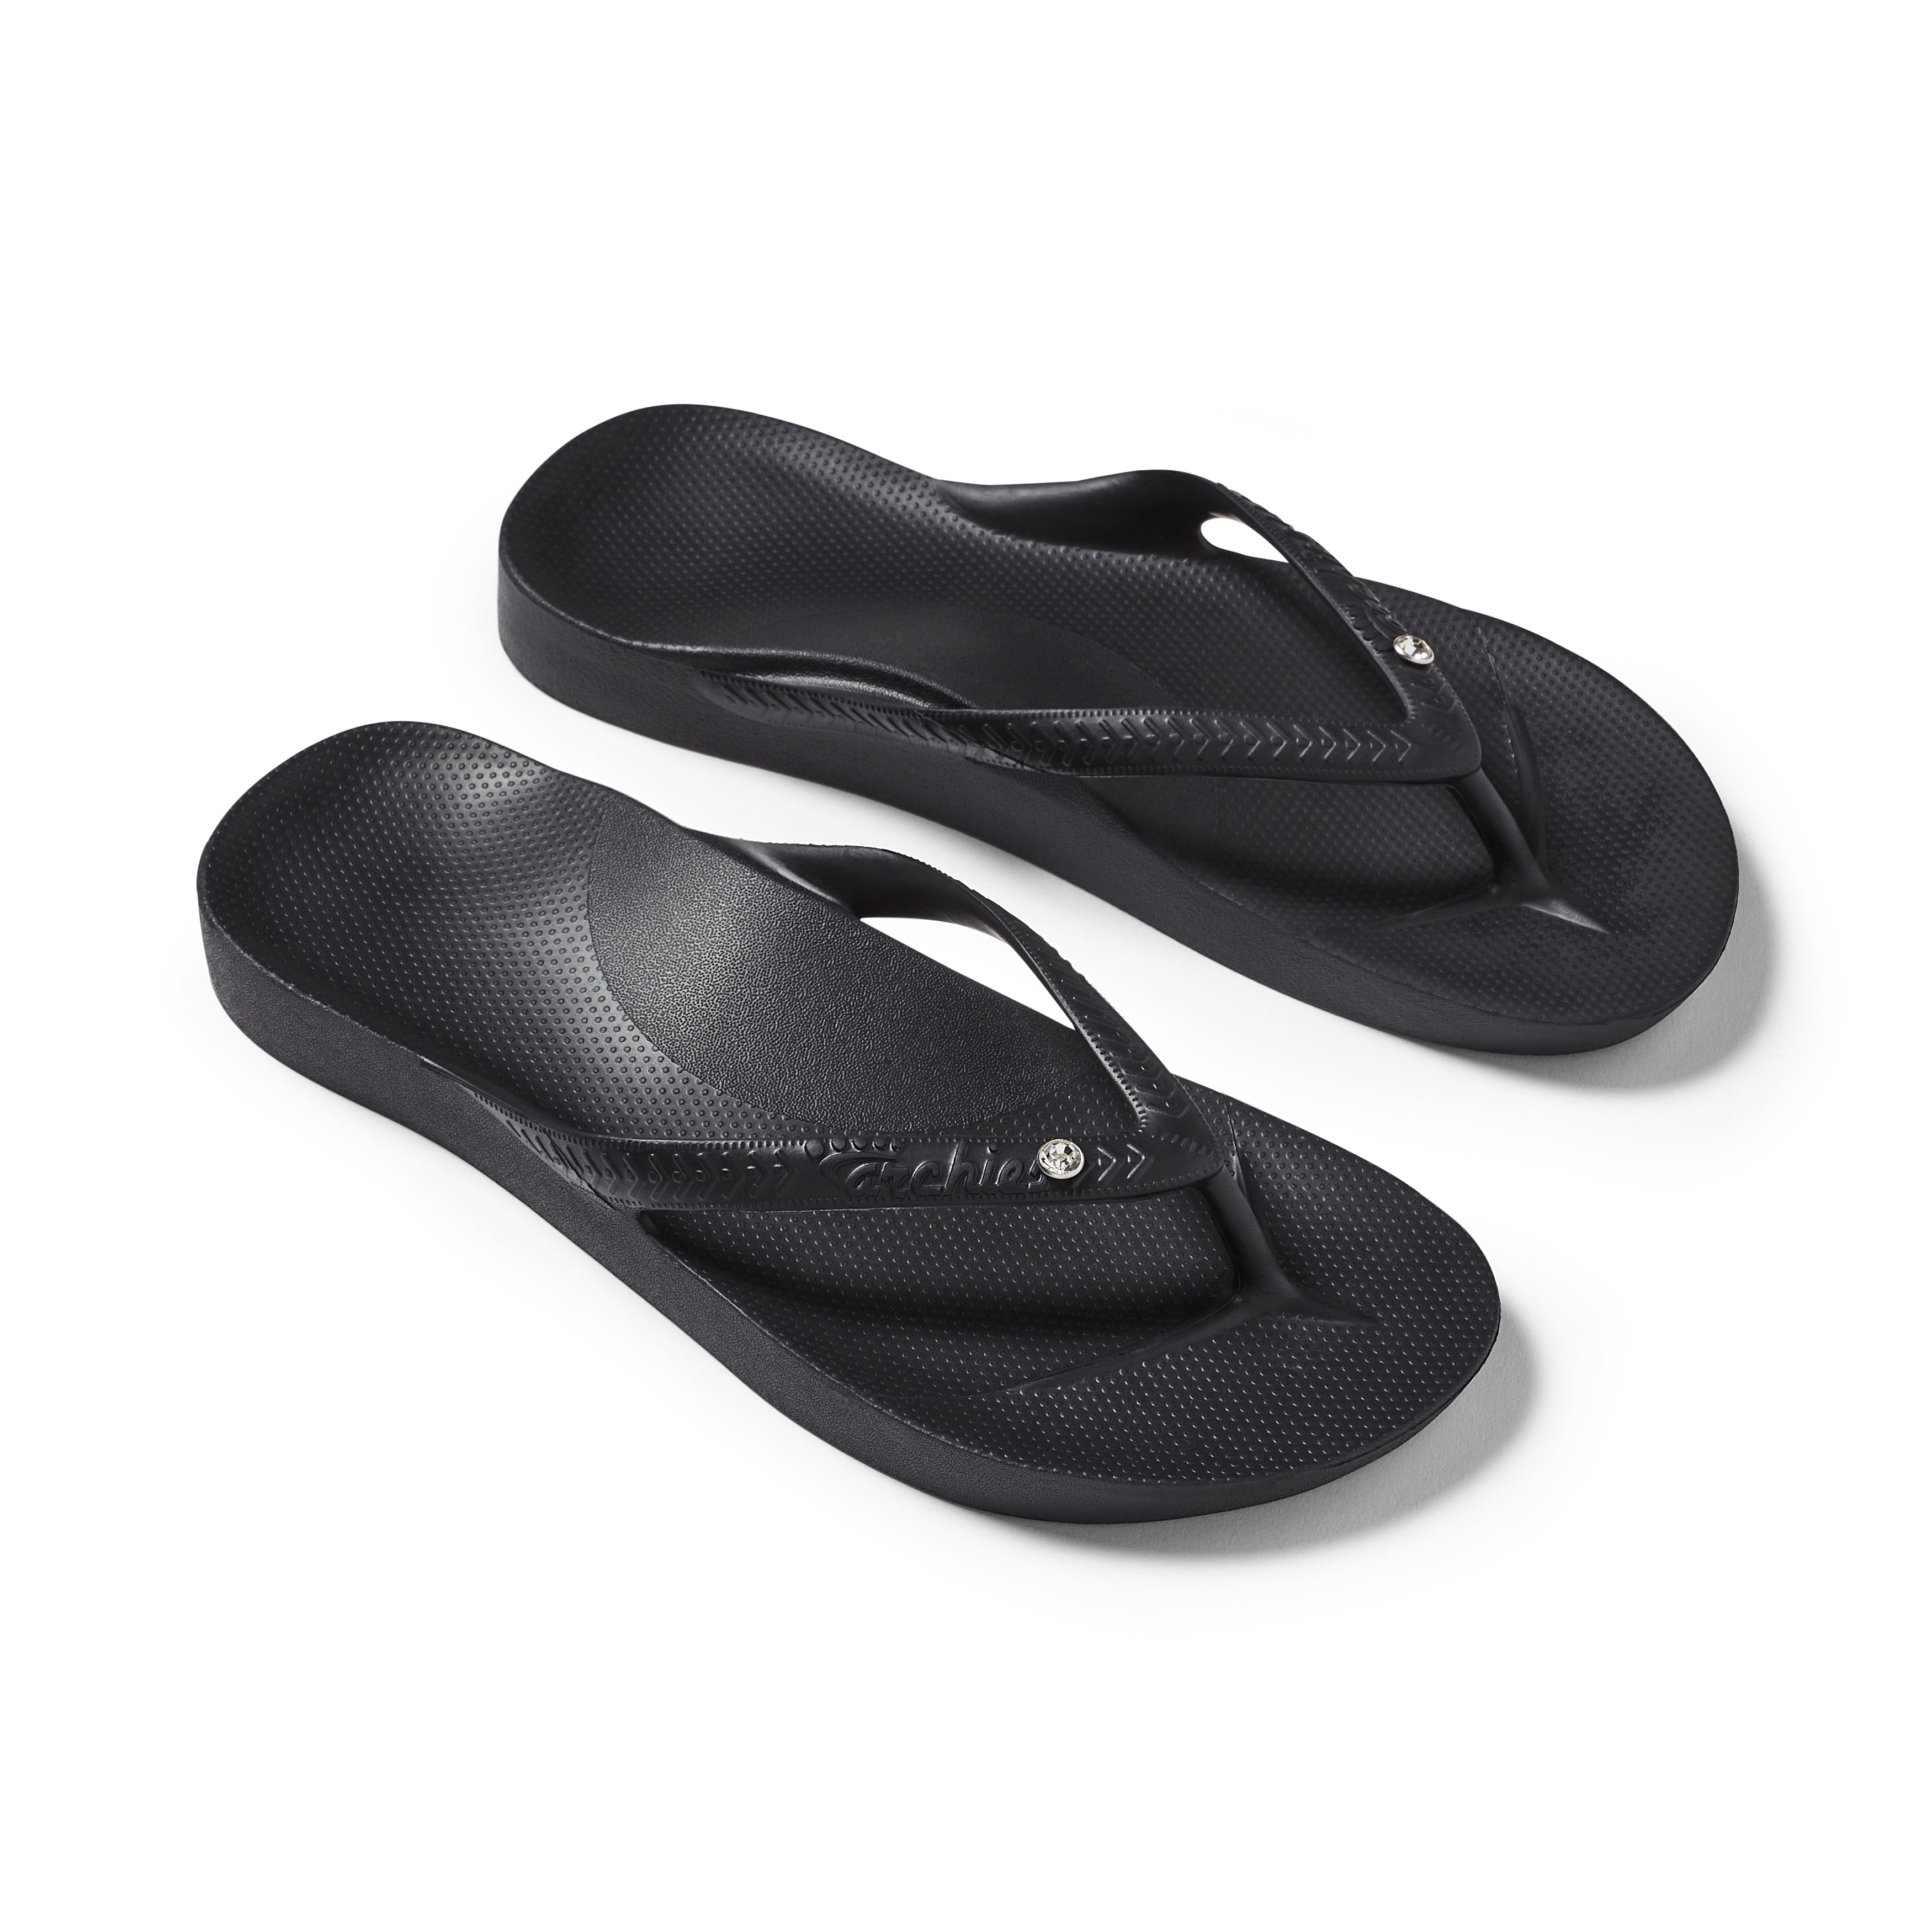 Archies Arch Support Jandals Black - Ski Trading Post